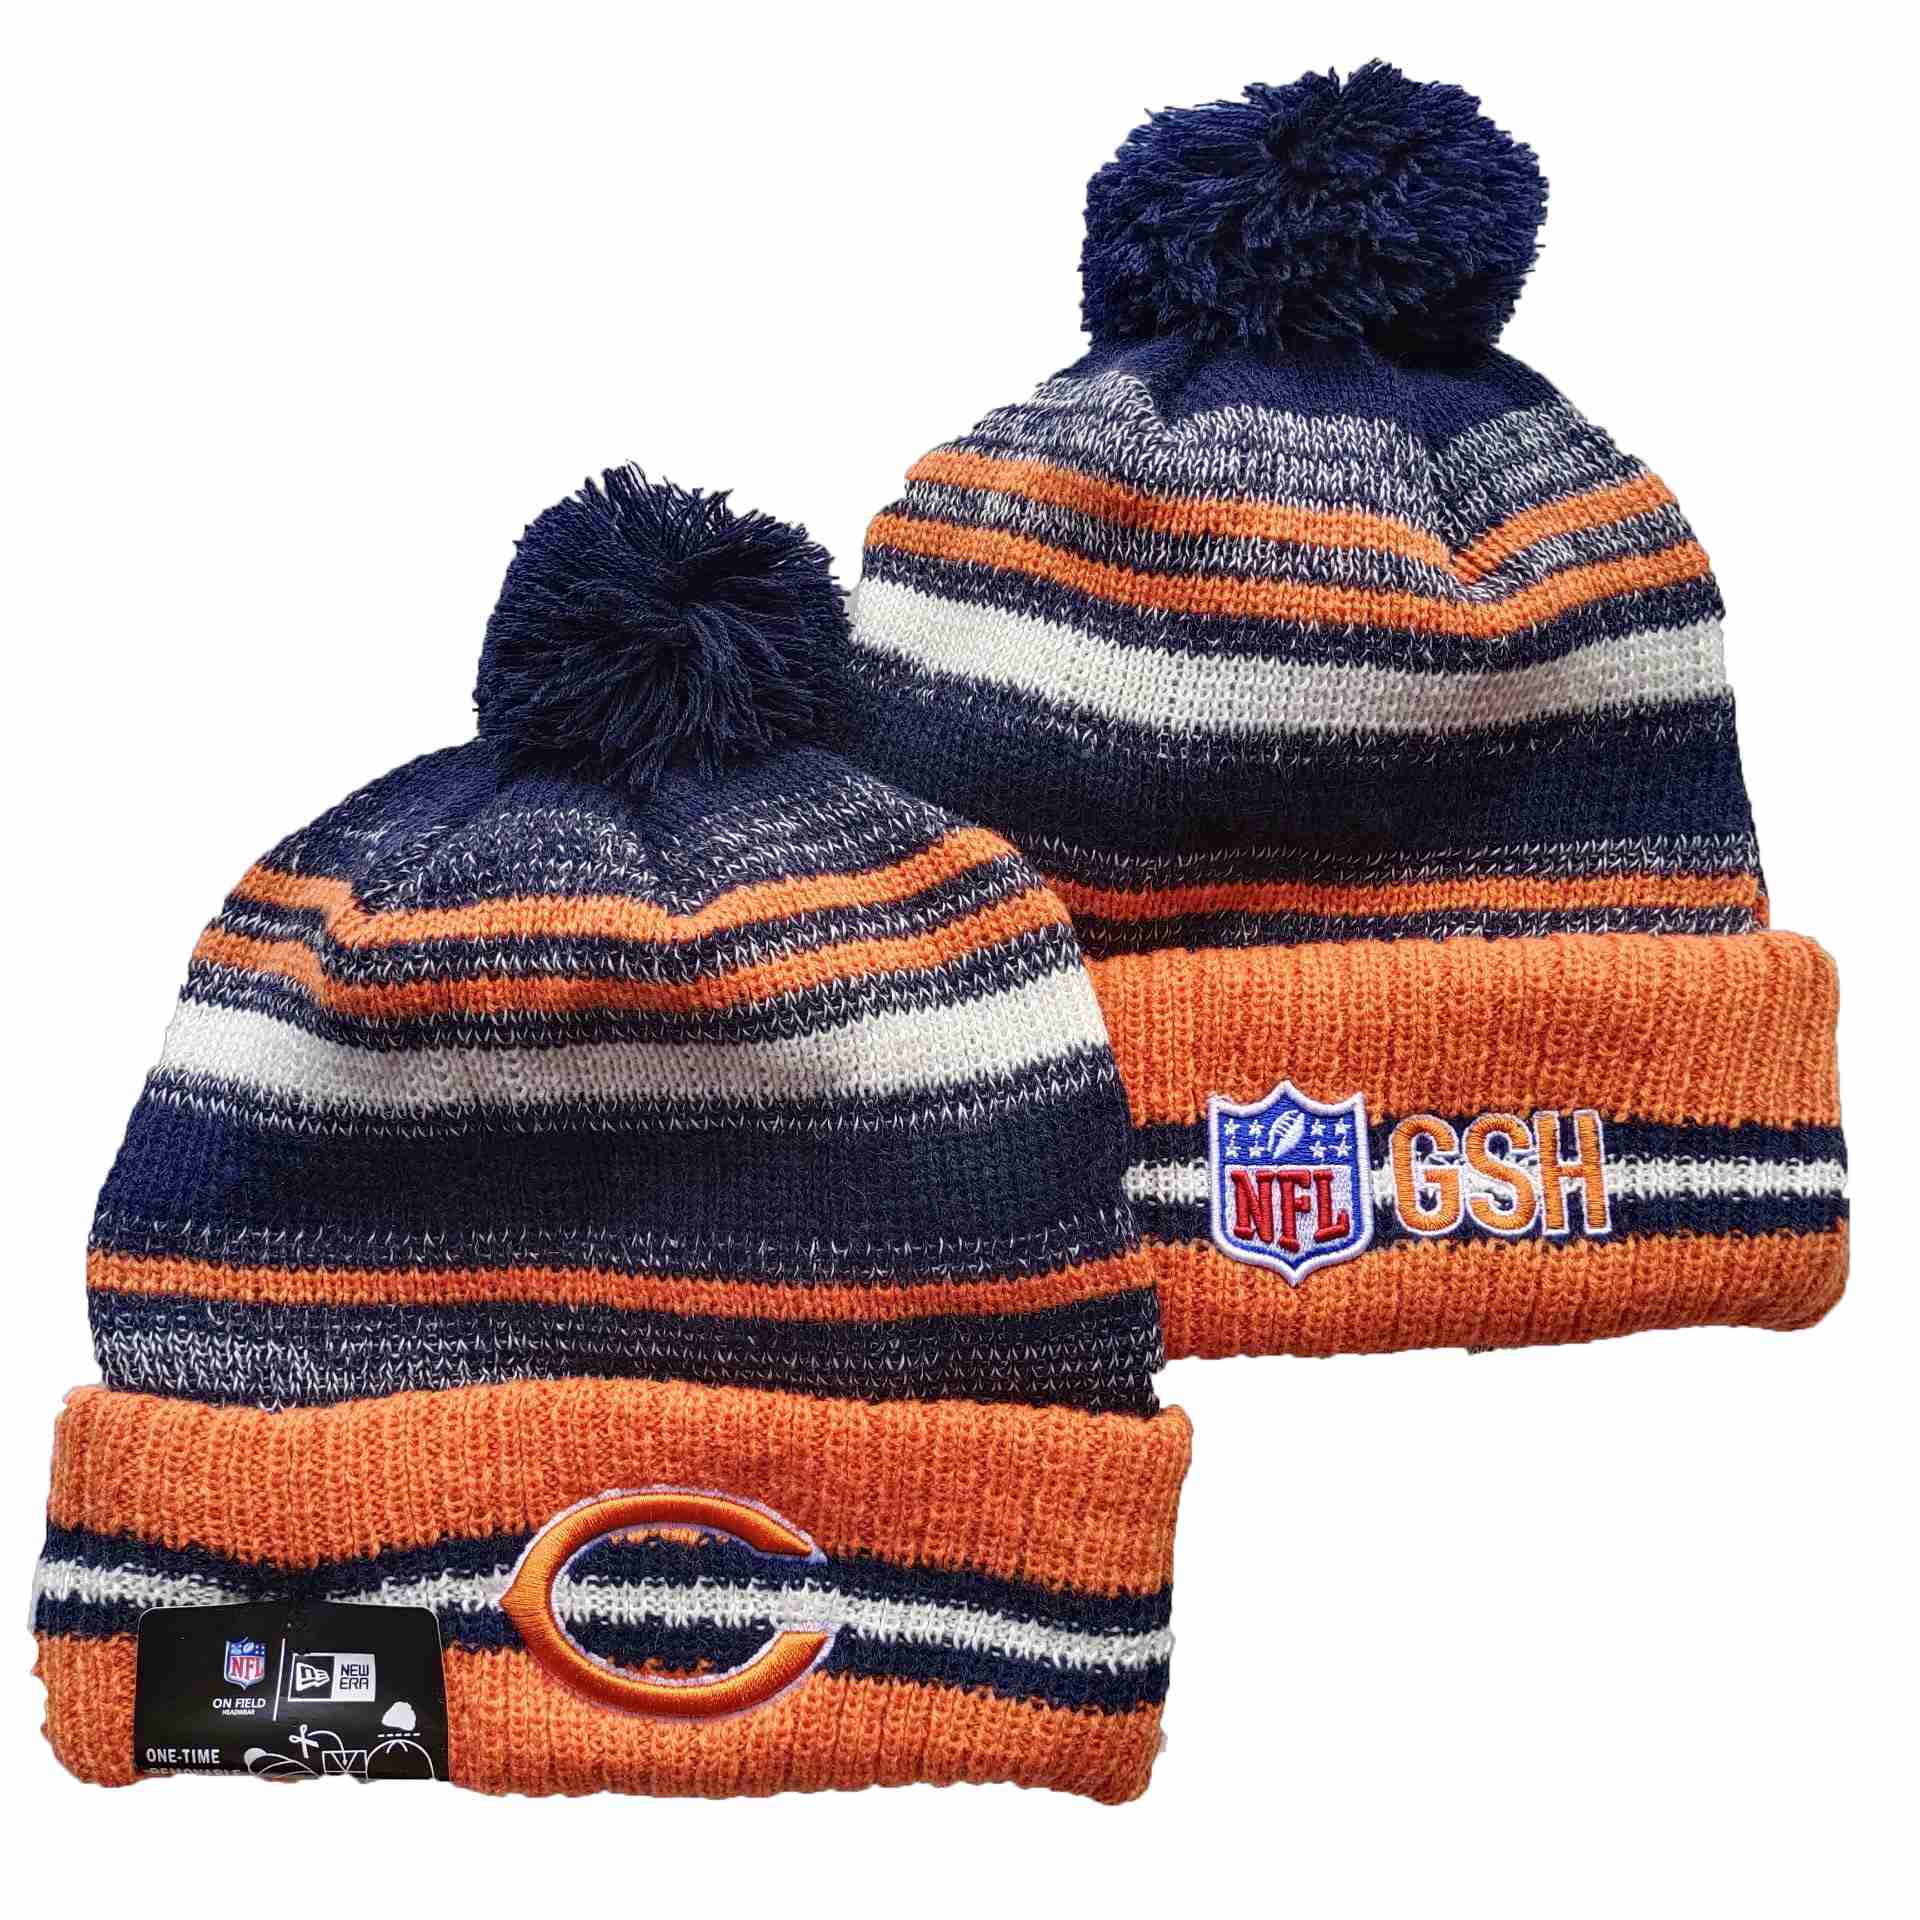 NFL Chicago Bears Beanies Knit Hats-YD896